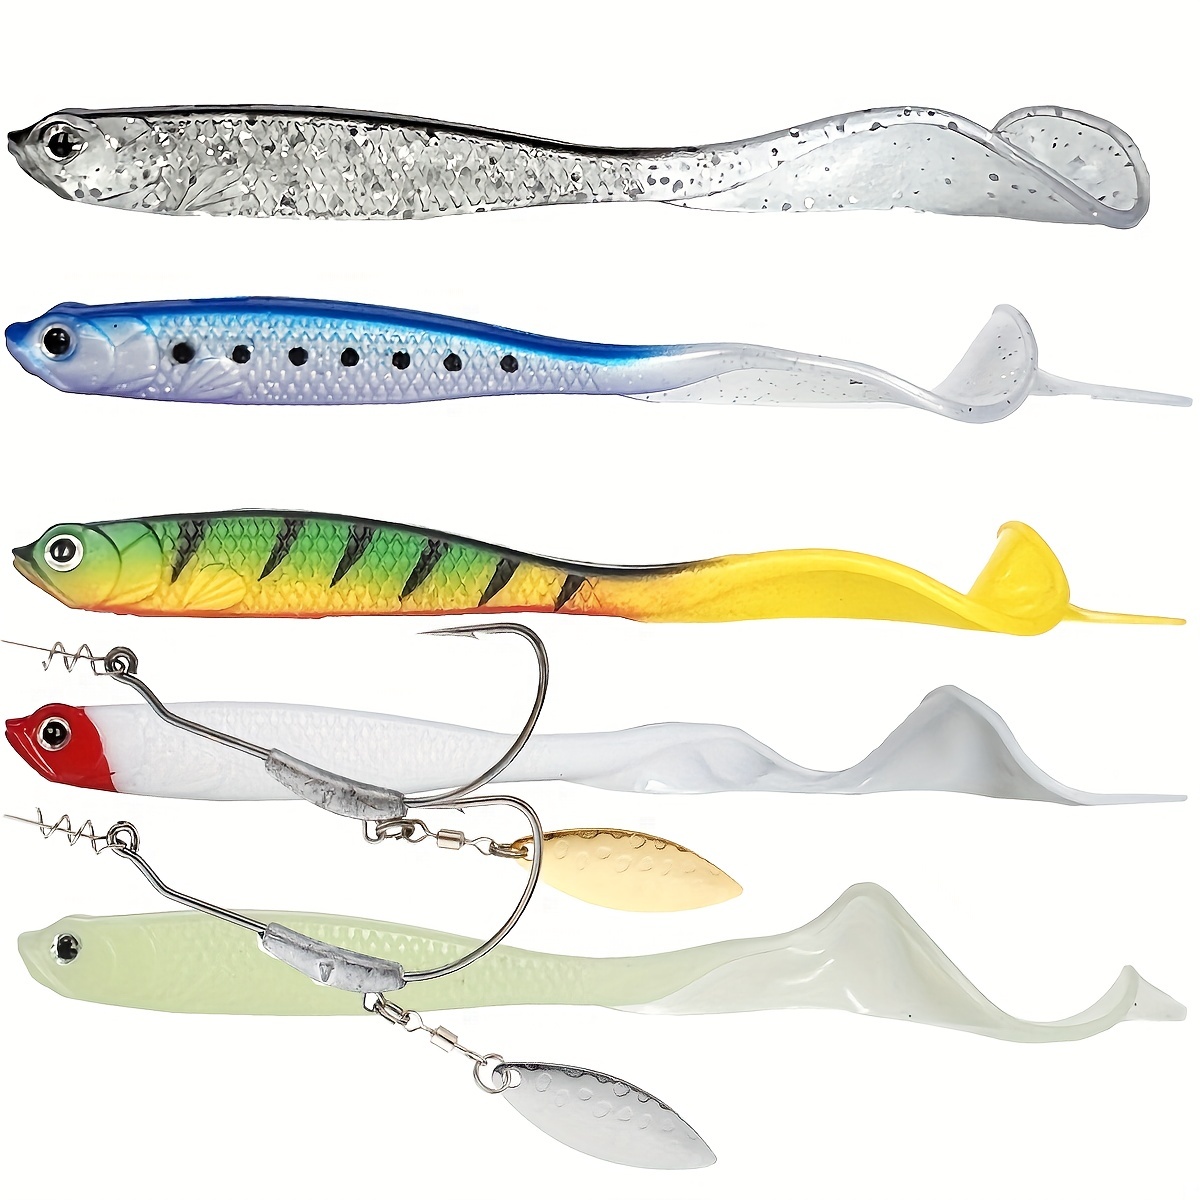  Soft Loach Fishing Lures, Hopping Swimbait, Enlarged Tail,  Shrimp Oil Smell, Glitter Chips Bionic Scale Strong Body, Freshwater  Saltwater, for Bass Snakehead Pike Trout, 5pc (Mix Colors 5 pcs (A)) 